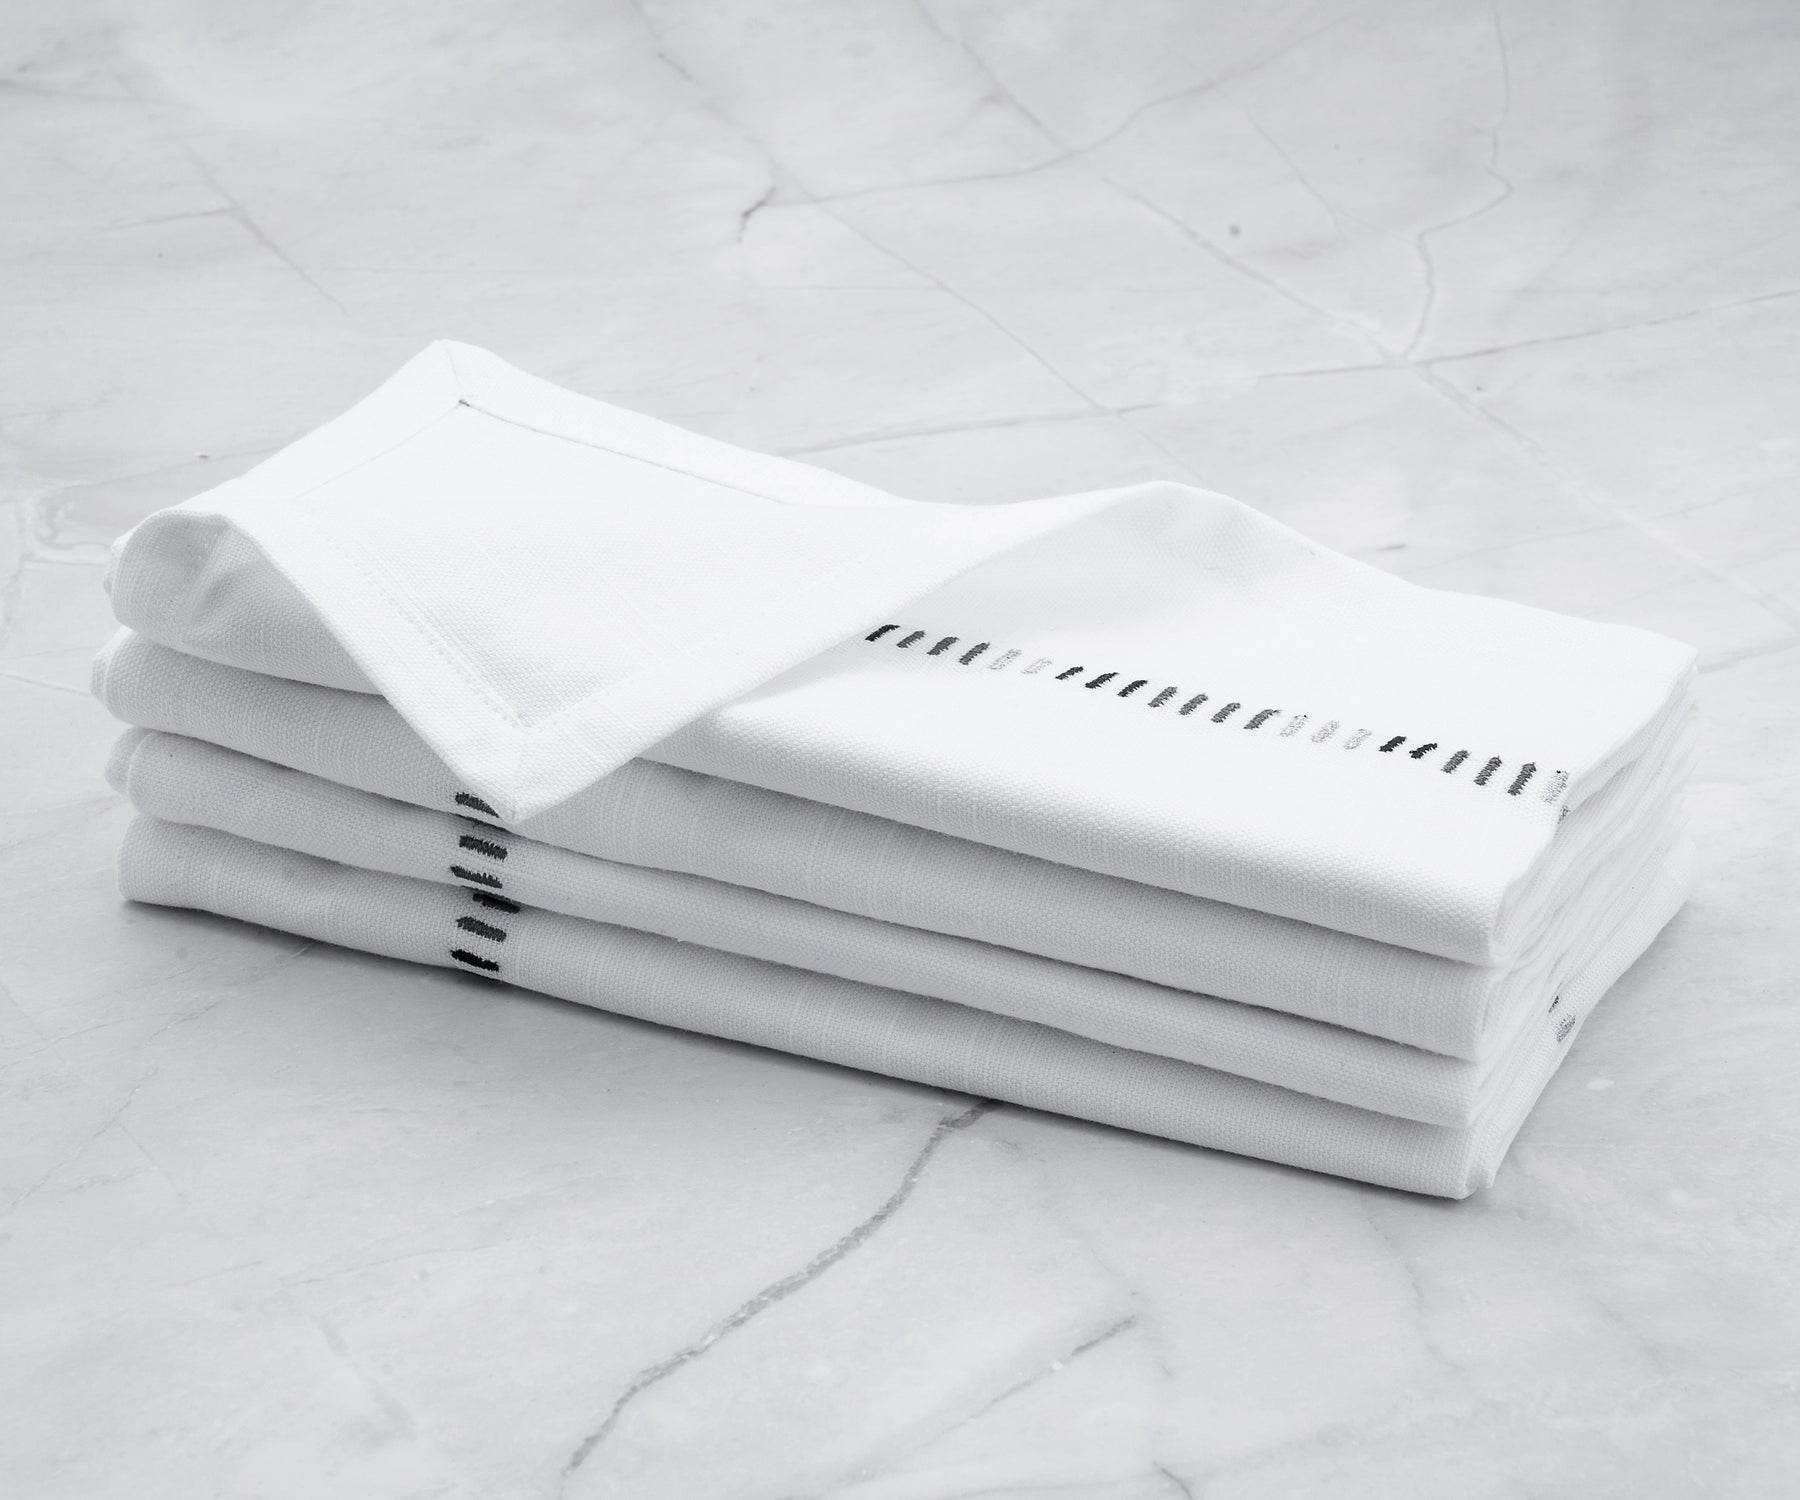 Classic white cotton napkins for timeless appeal